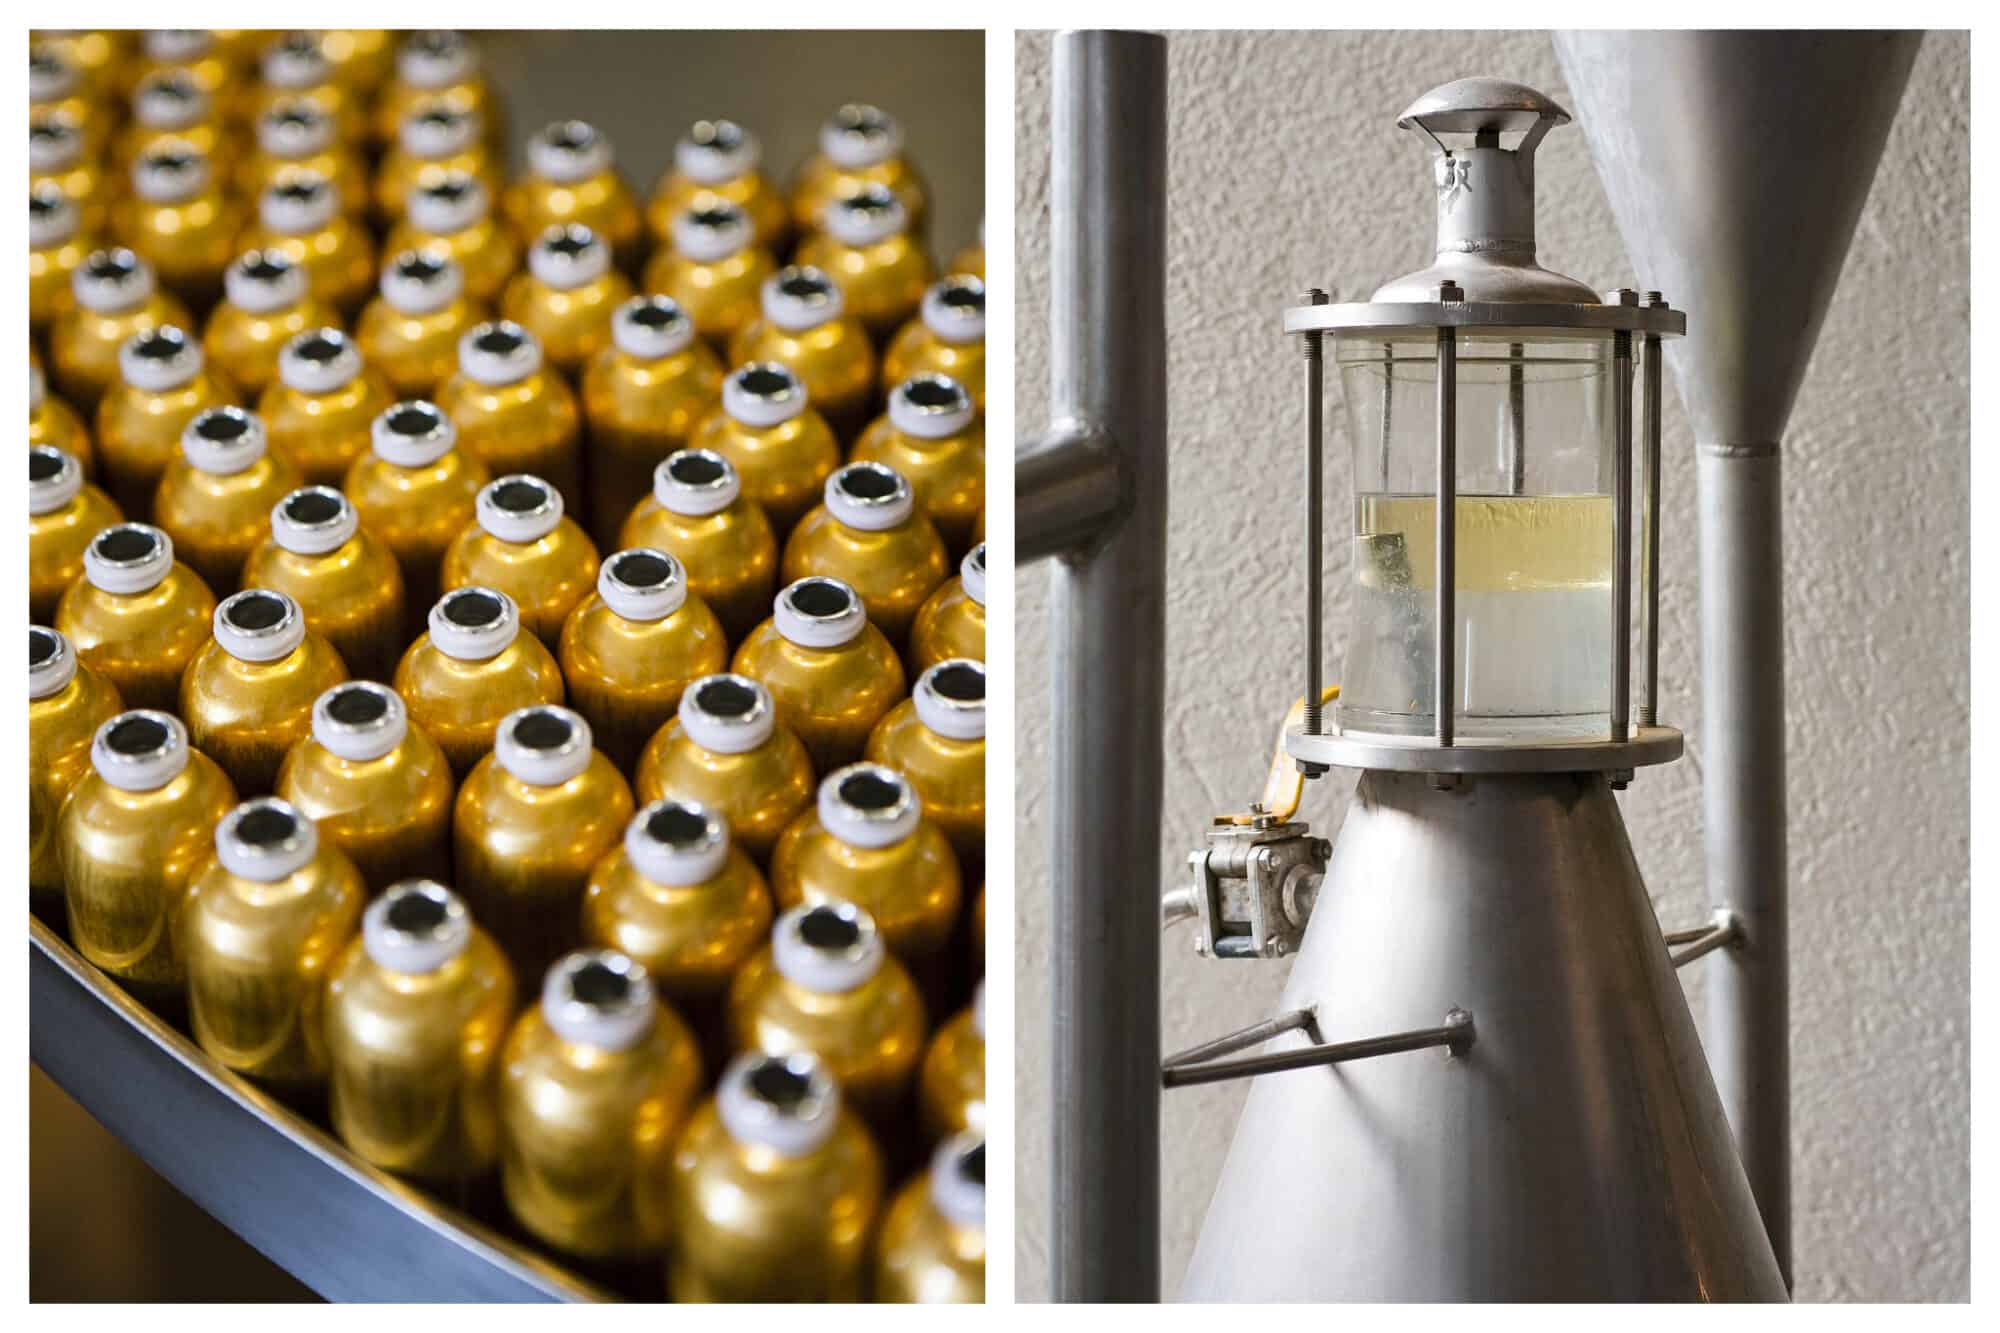 Left: Shiny golden bottles are lined up next to each other on a conveyor belt in the Fragonard factory, ready to be filled with perfume, Right: A clear machine distills fragrances, gold in color, that will be used to make perfume